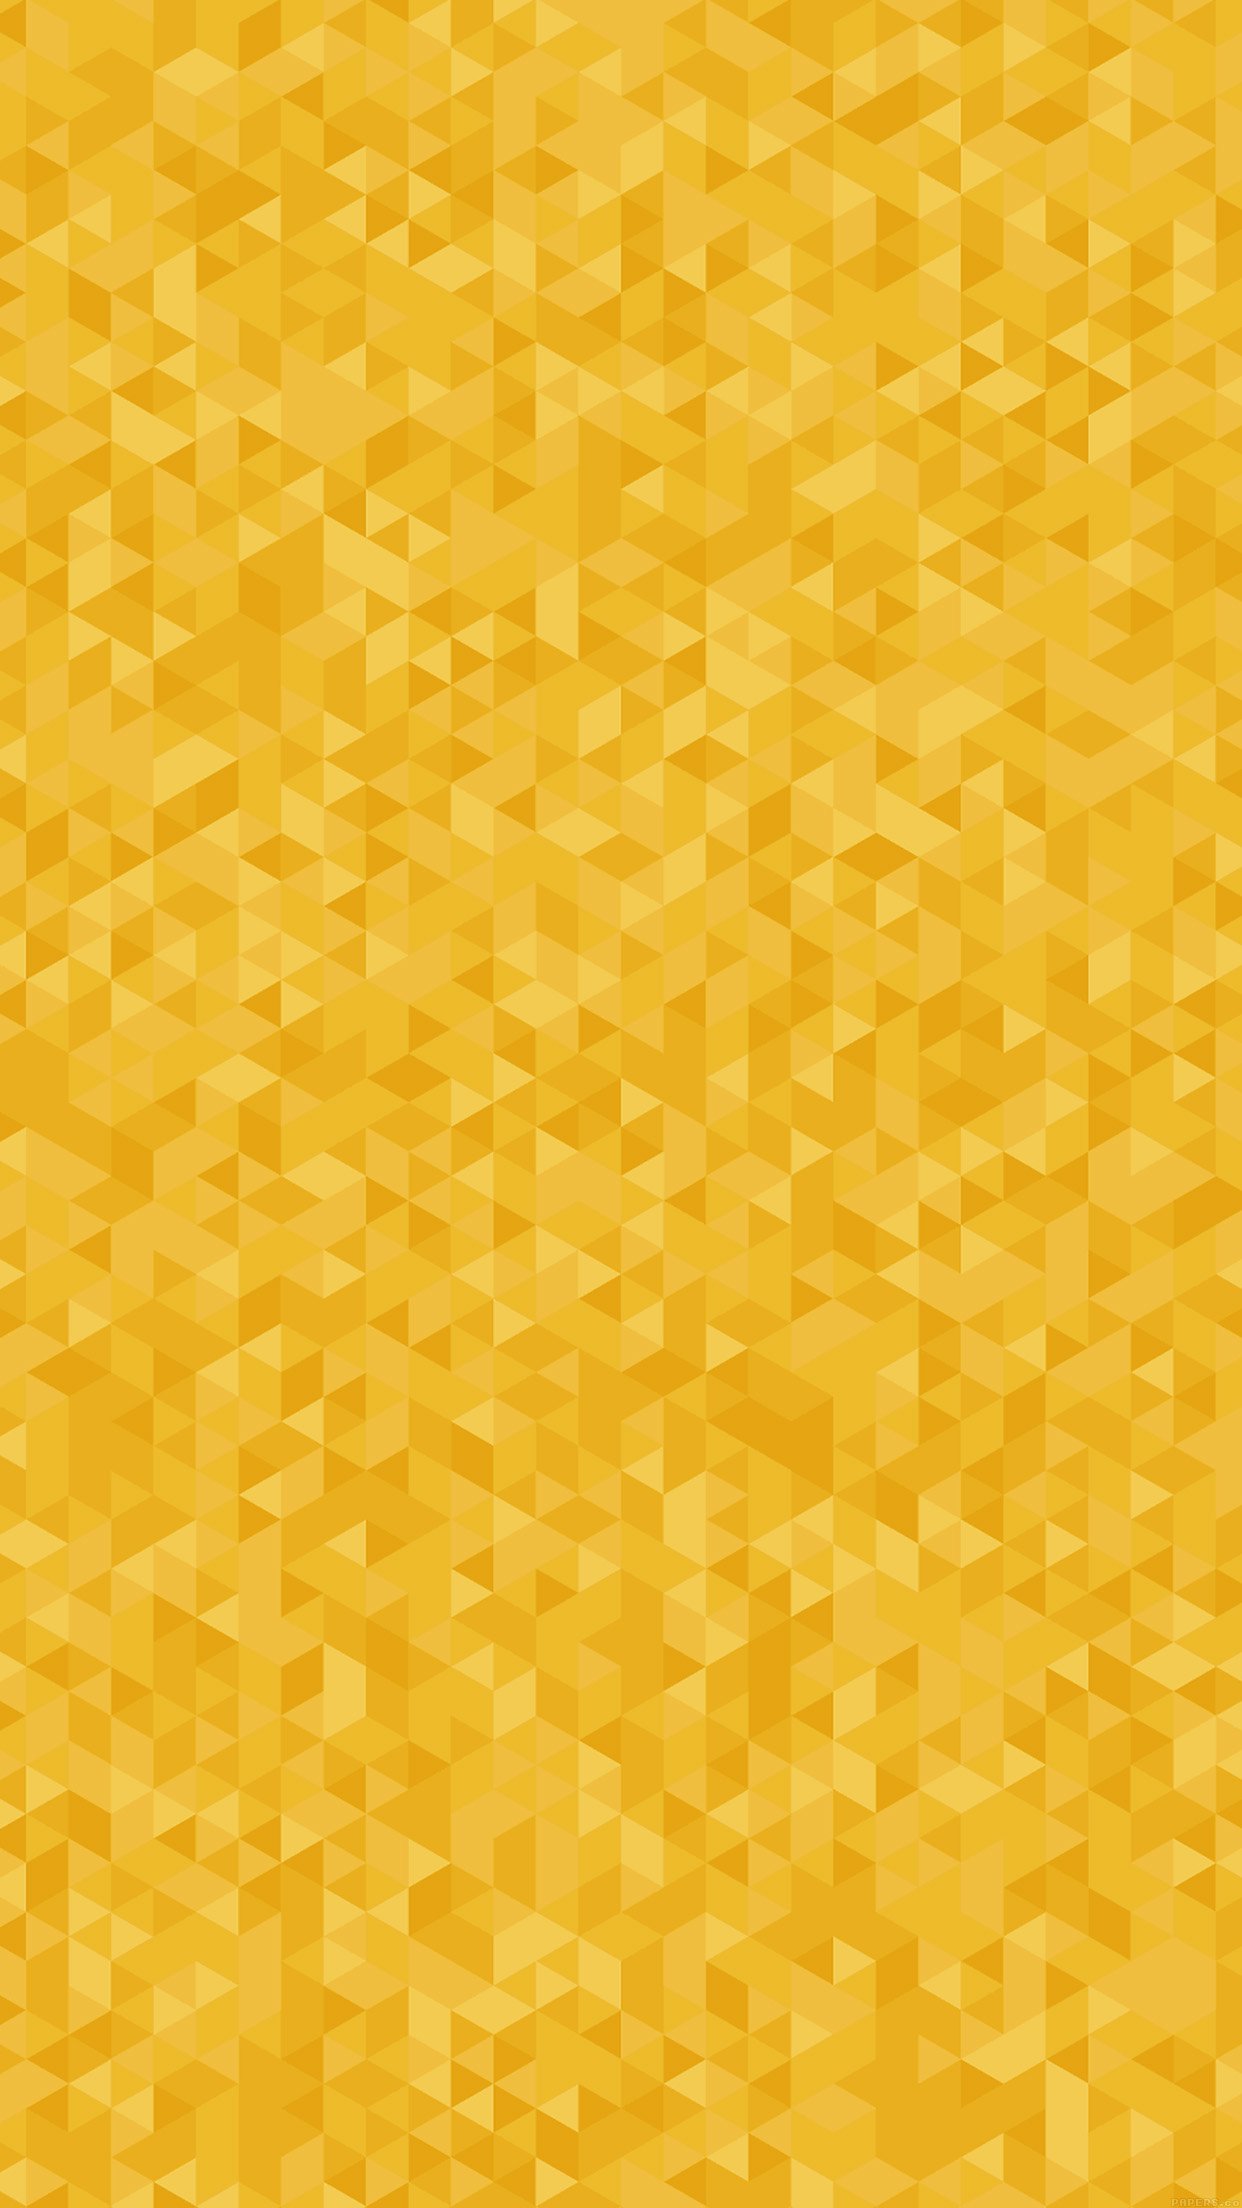 Diamonds Abstract Art Gold Pattern Android wallpaper